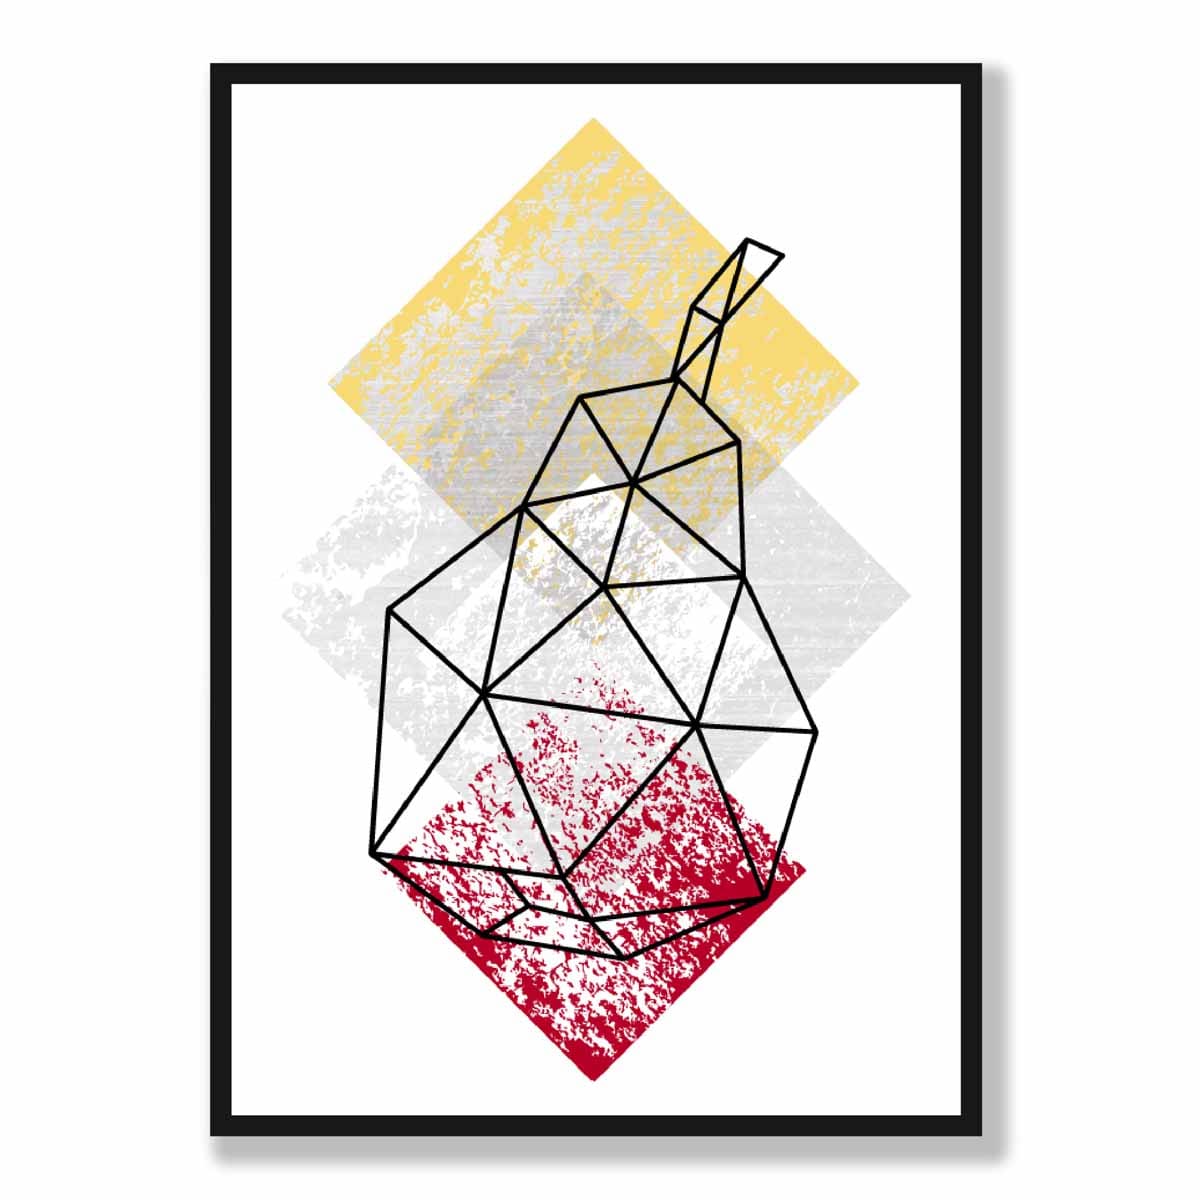 Geometric Fruit Line art Poster of Pear Textured Yellow Grey Red